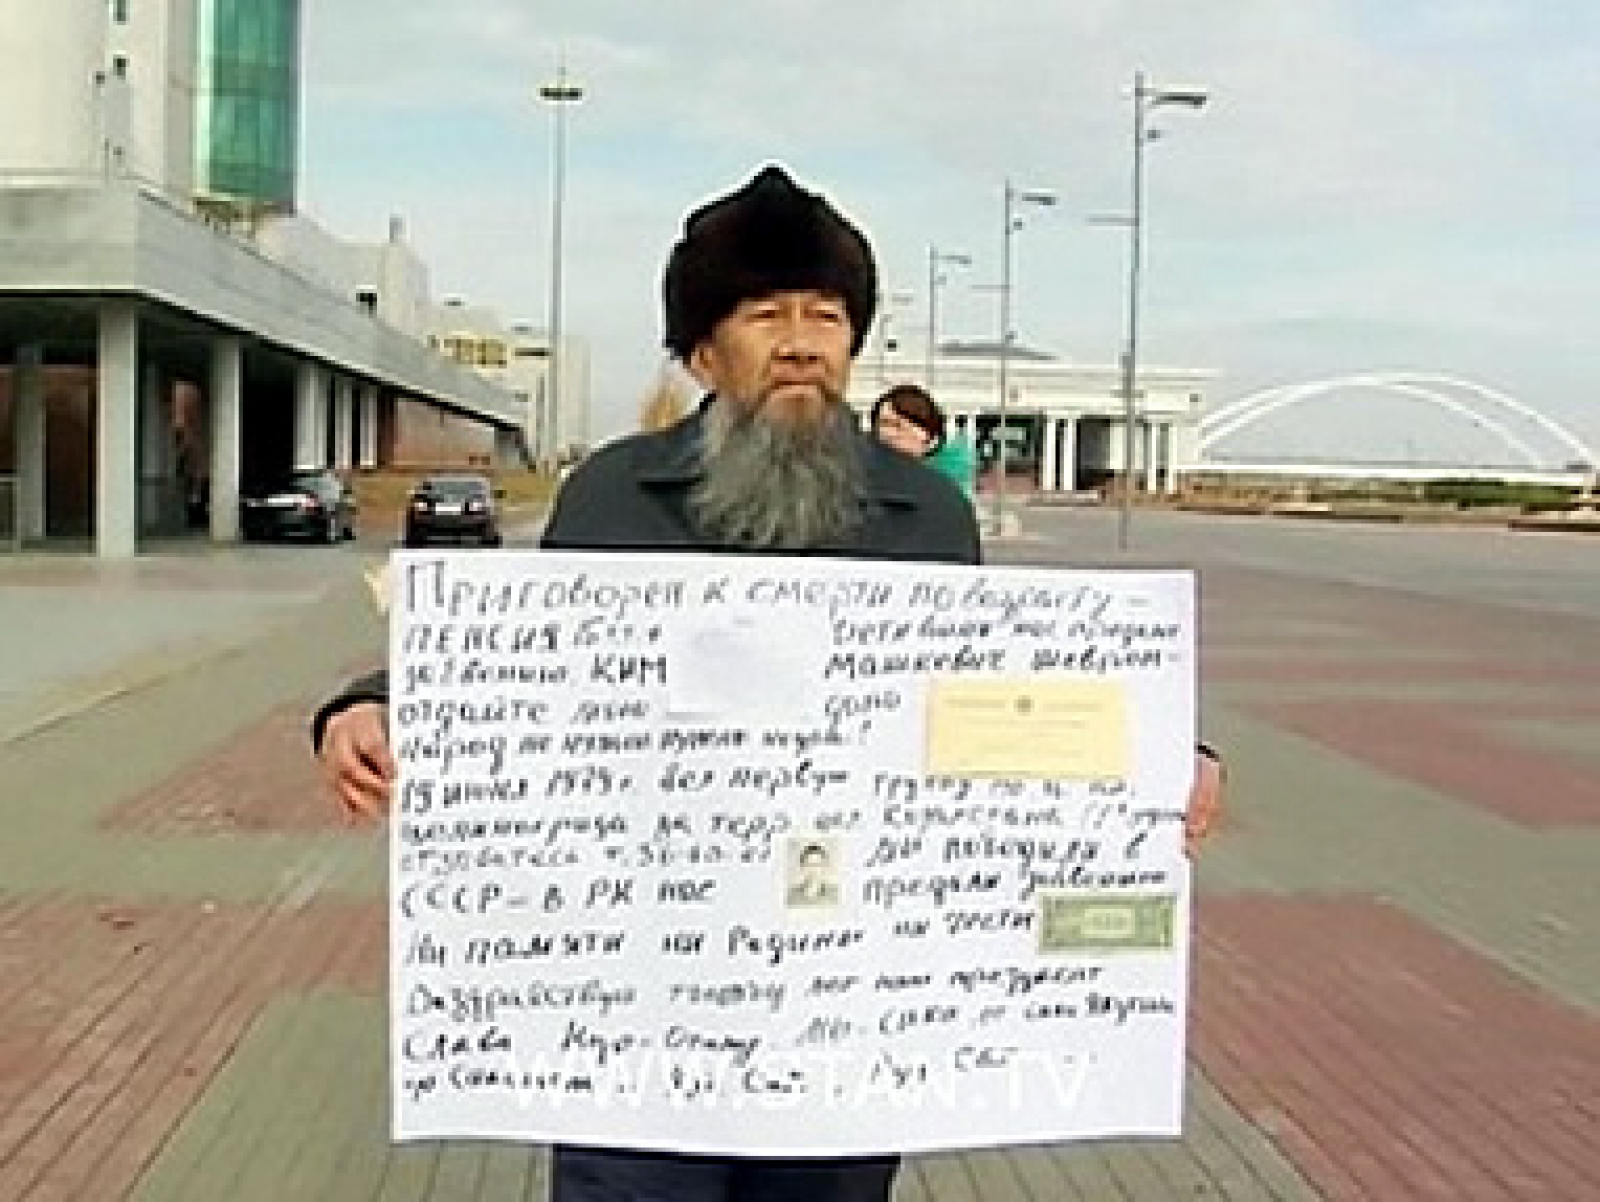 Freedom of Assembly Rights Limited in Kazakhstan, Study Finds